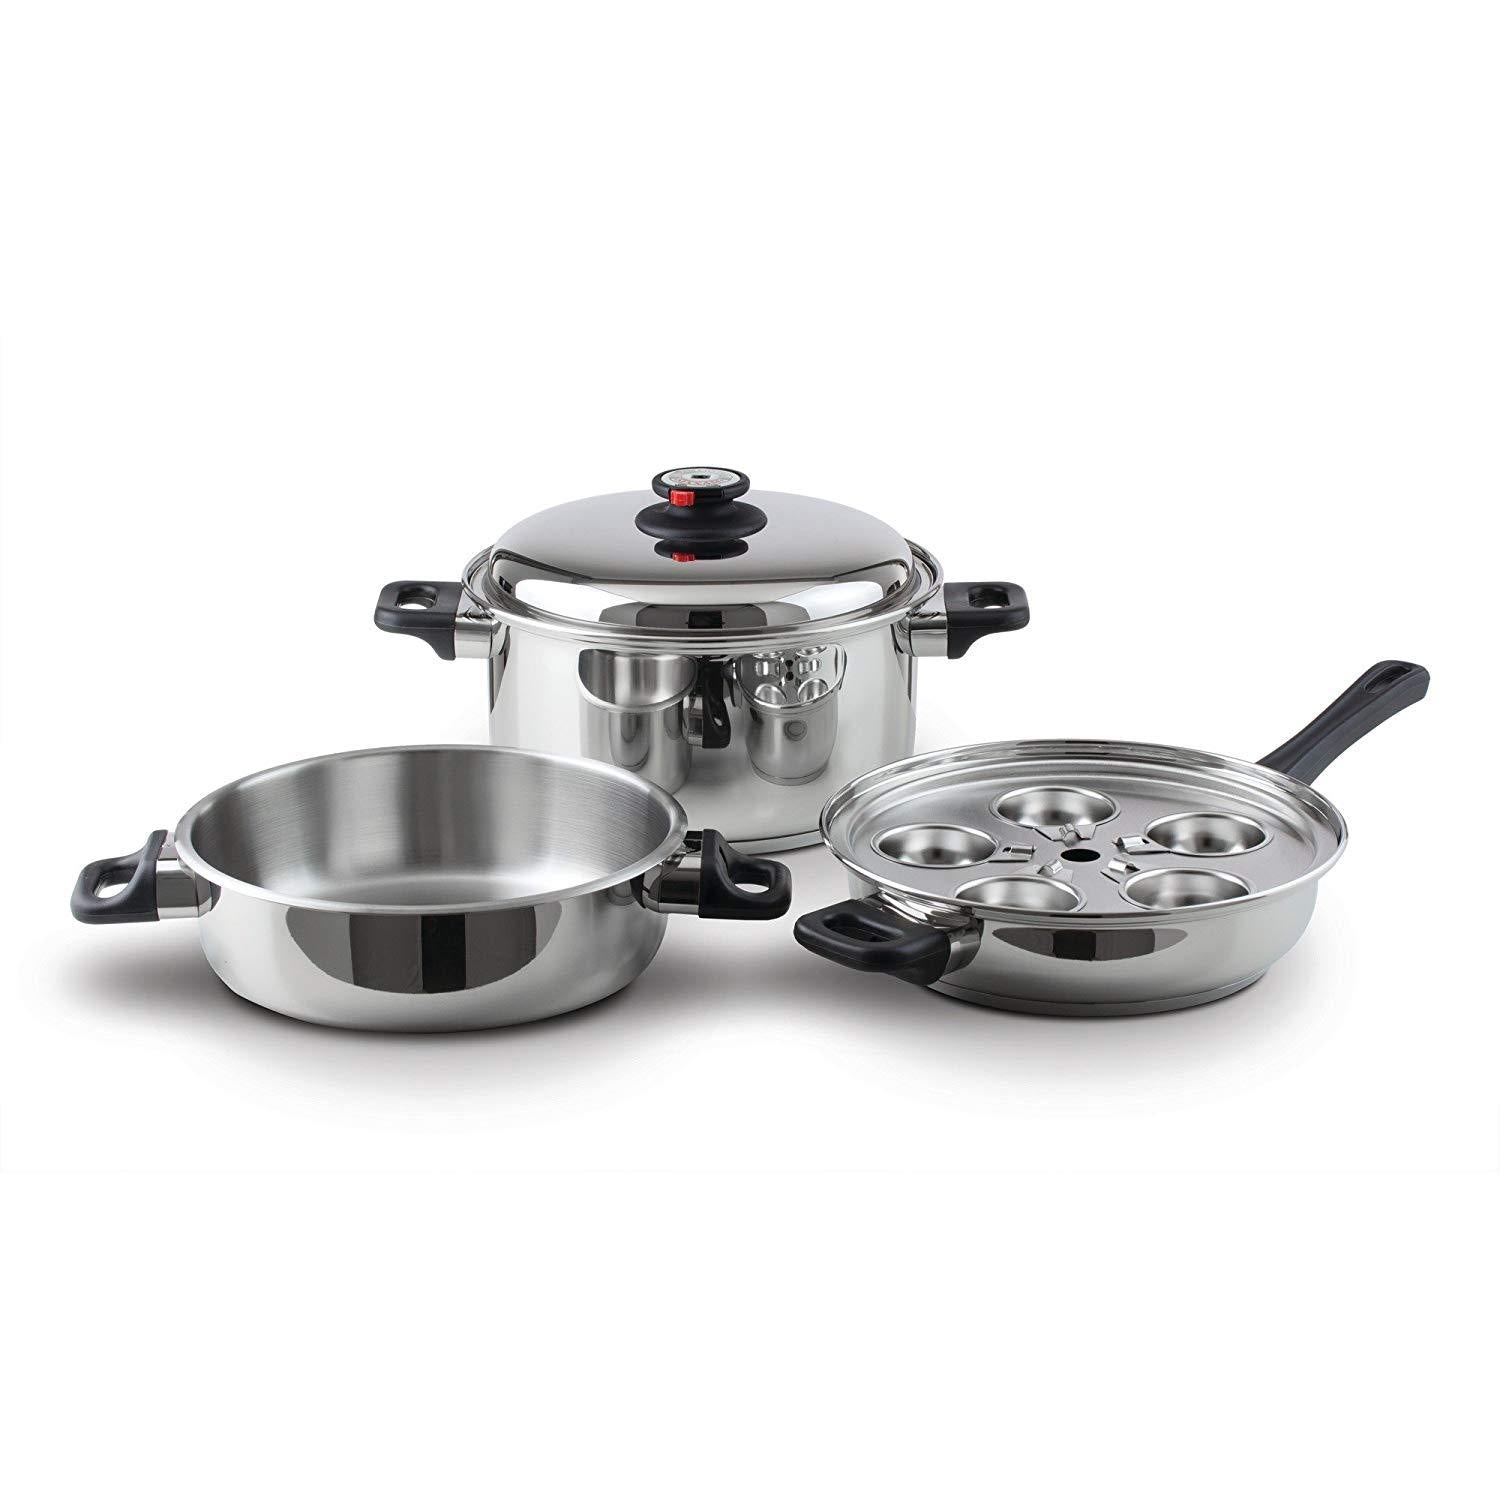 Maxam 9-Element Surgical 17-Piece Cookware Set, Stainless Steel